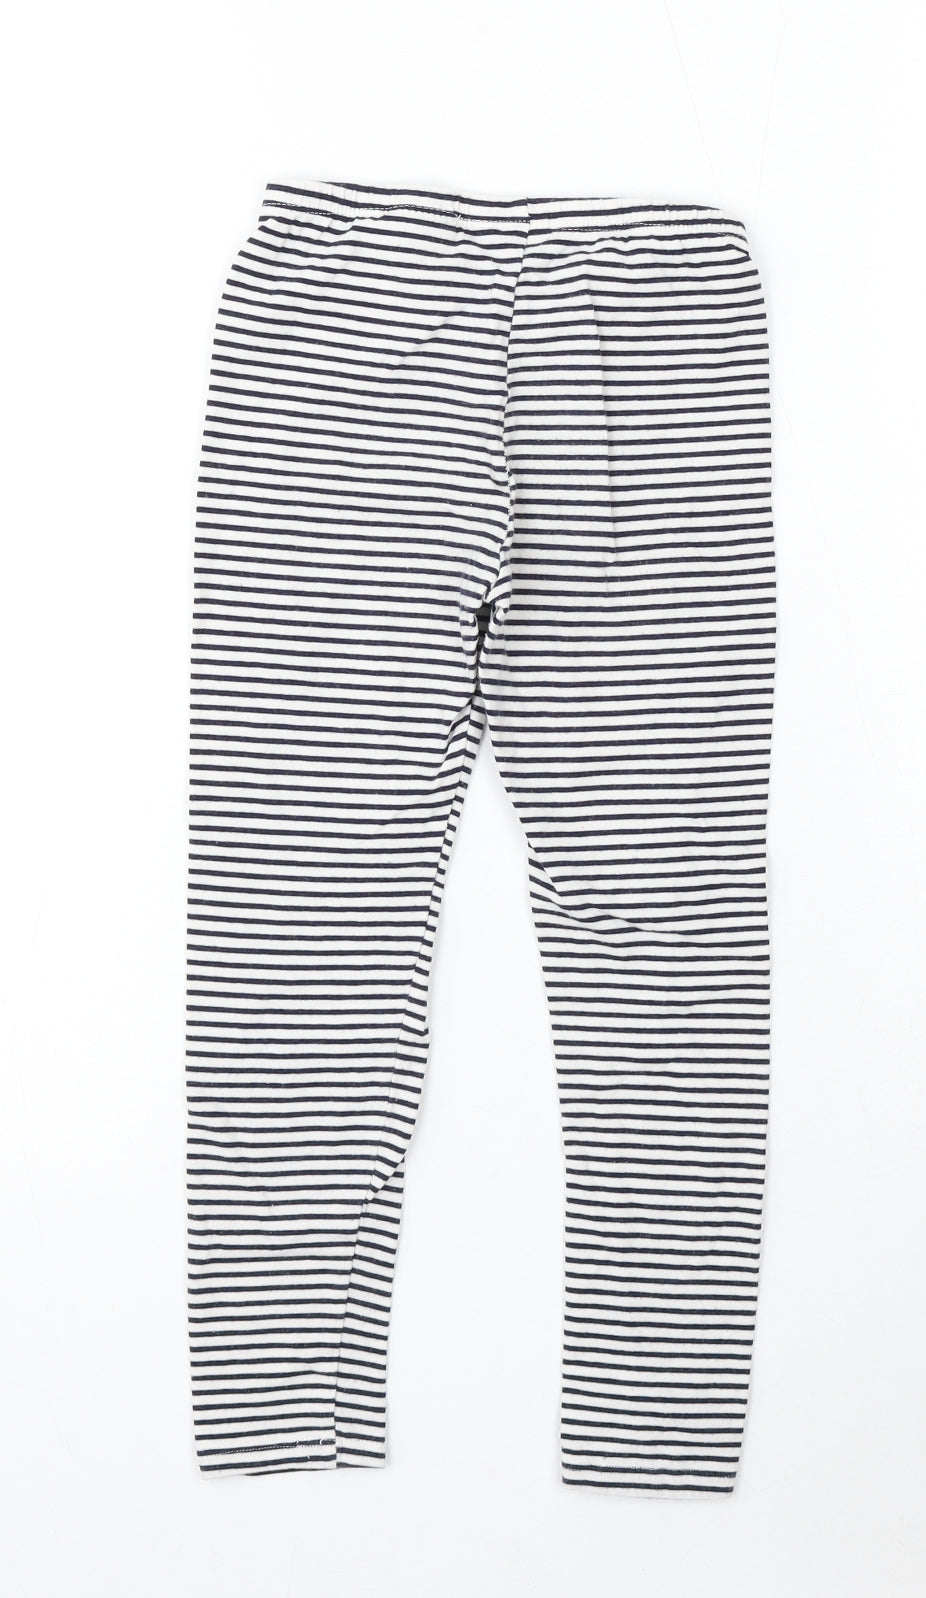 H&M Girls White Striped Cotton Jogger Trousers Size 7-8 Years Regular